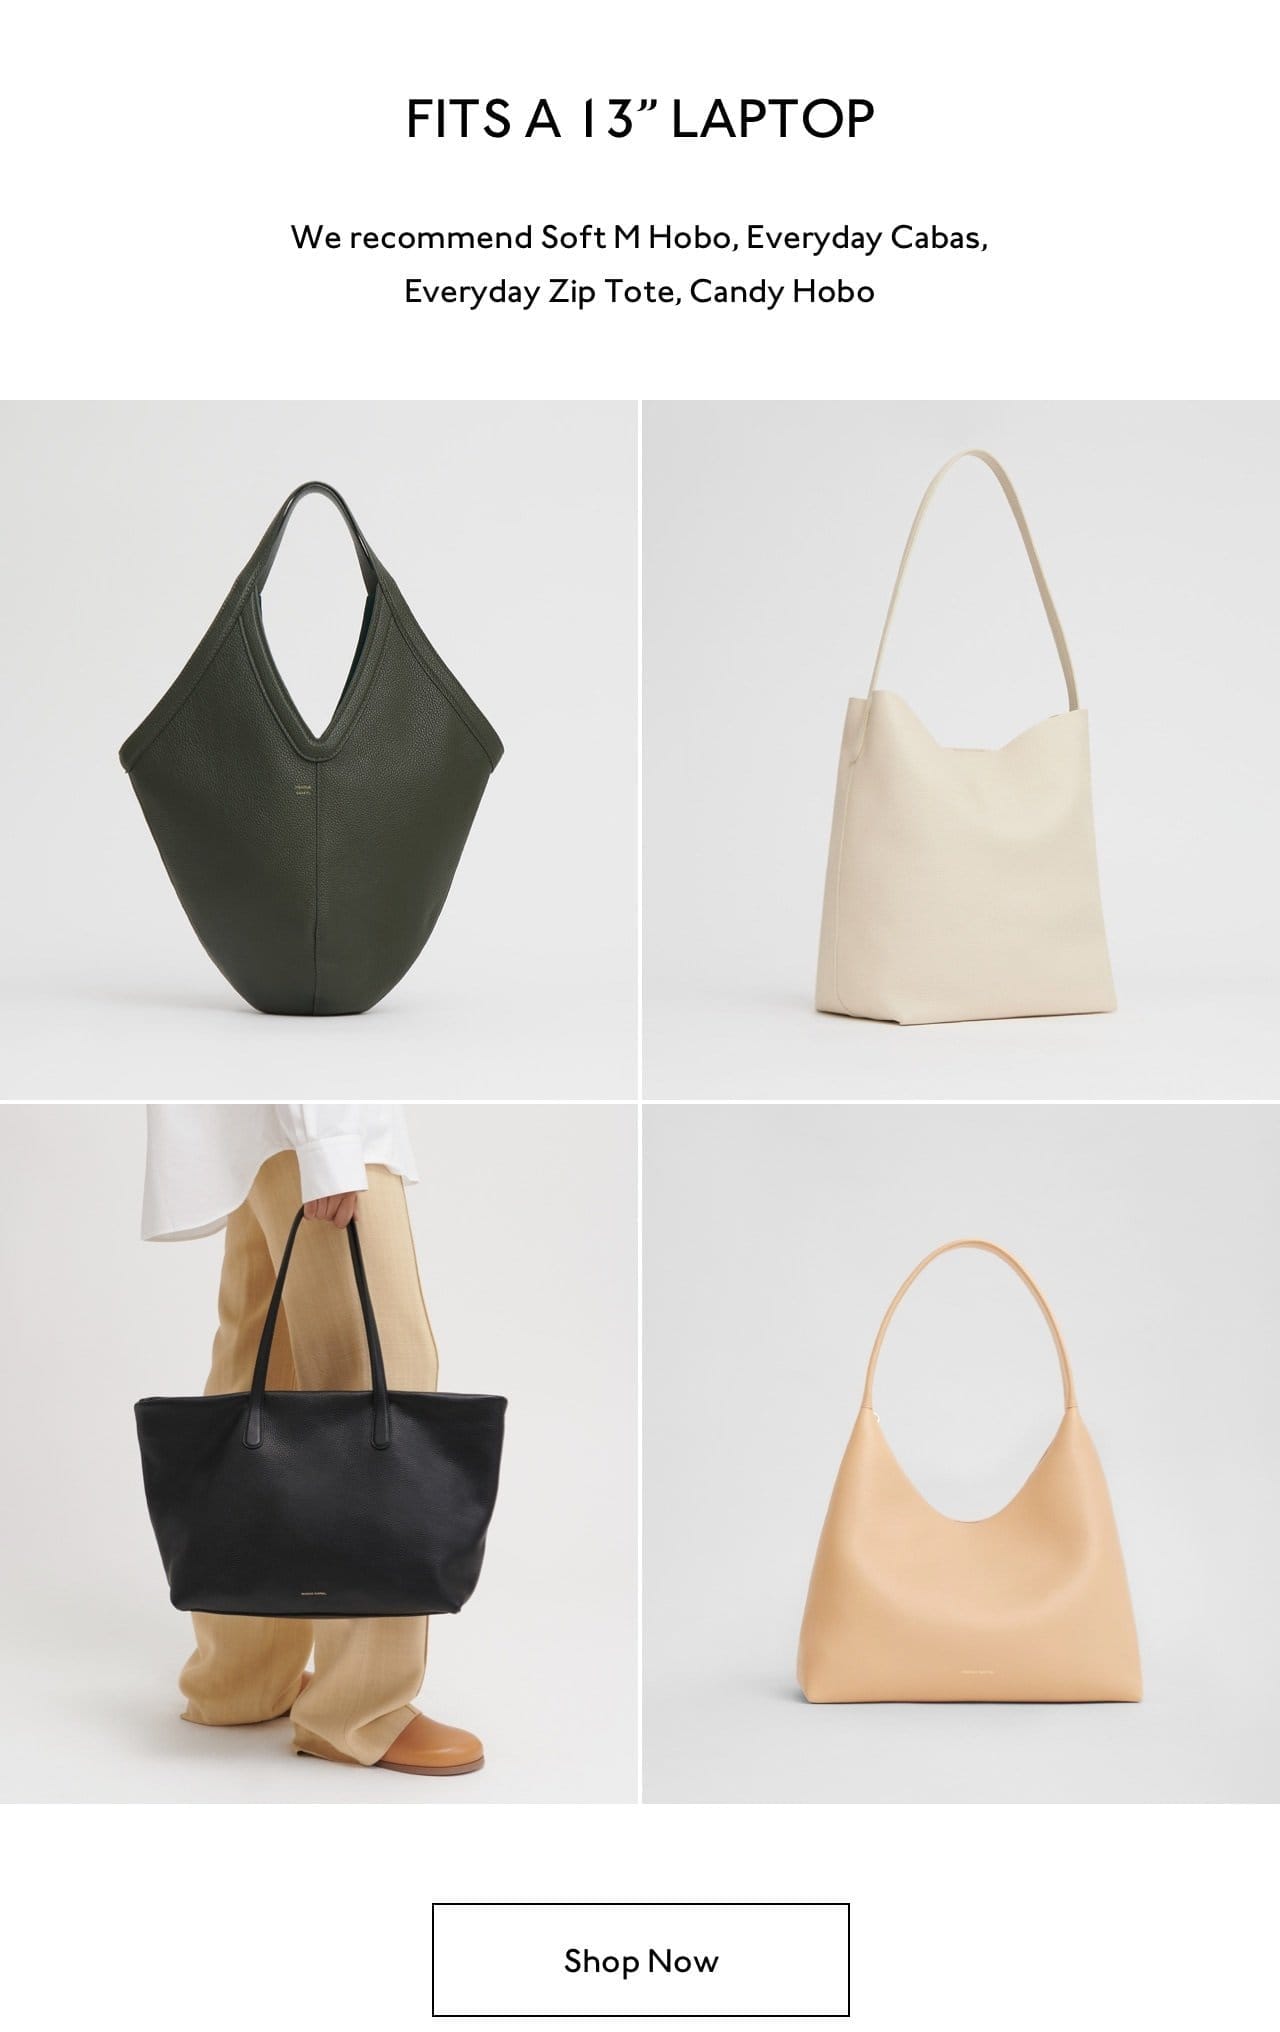 Fits a 13" laptop. We recommend the Soft M Hobo, Everyday Cabas, Everyday Zip Tote, Candy Hobo.